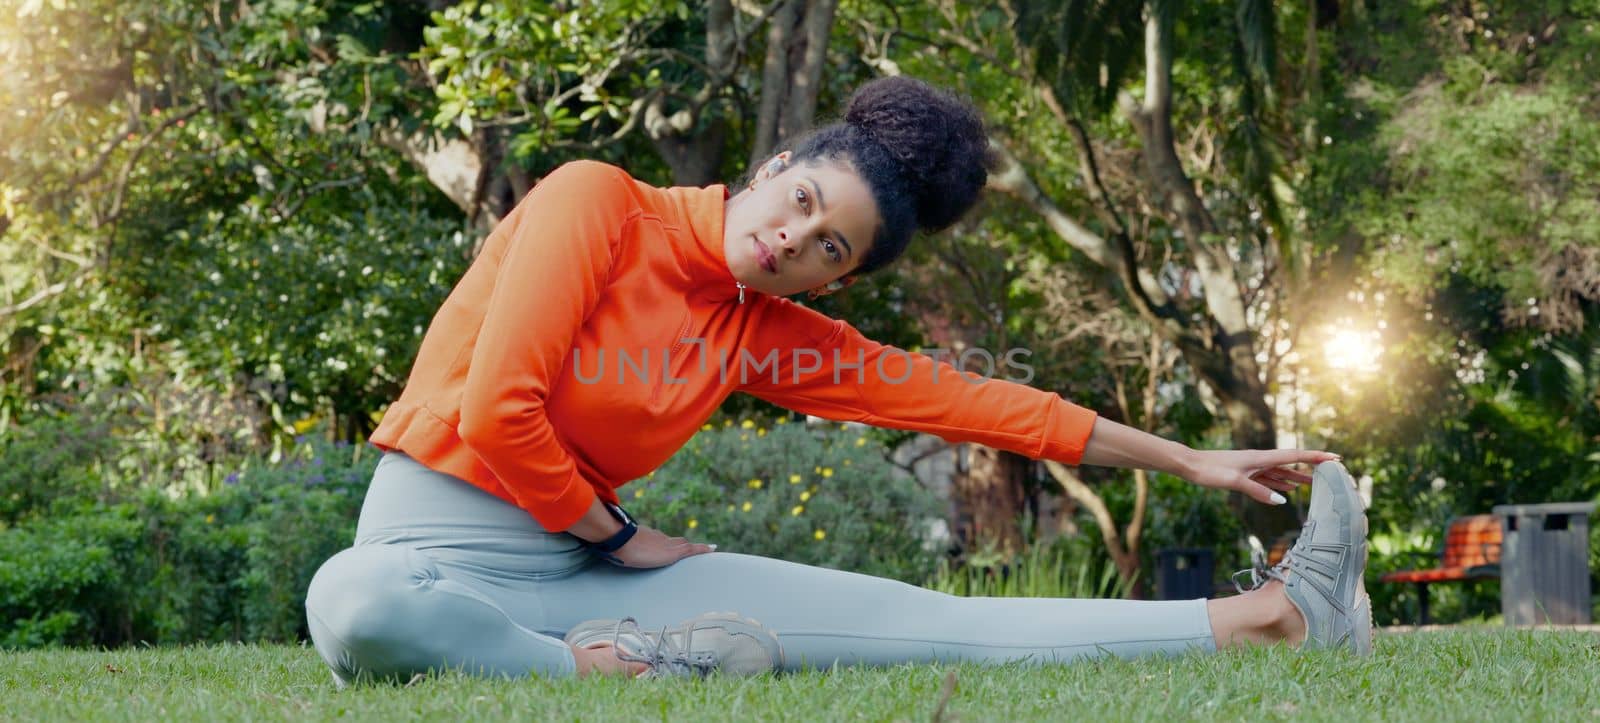 Stretching, calm and breathing woman on grass in park or nature environment for fitness workout session. Wellness and health lifestyle of sports person doing muscle relax exercise sitting on ground by YuriArcurs